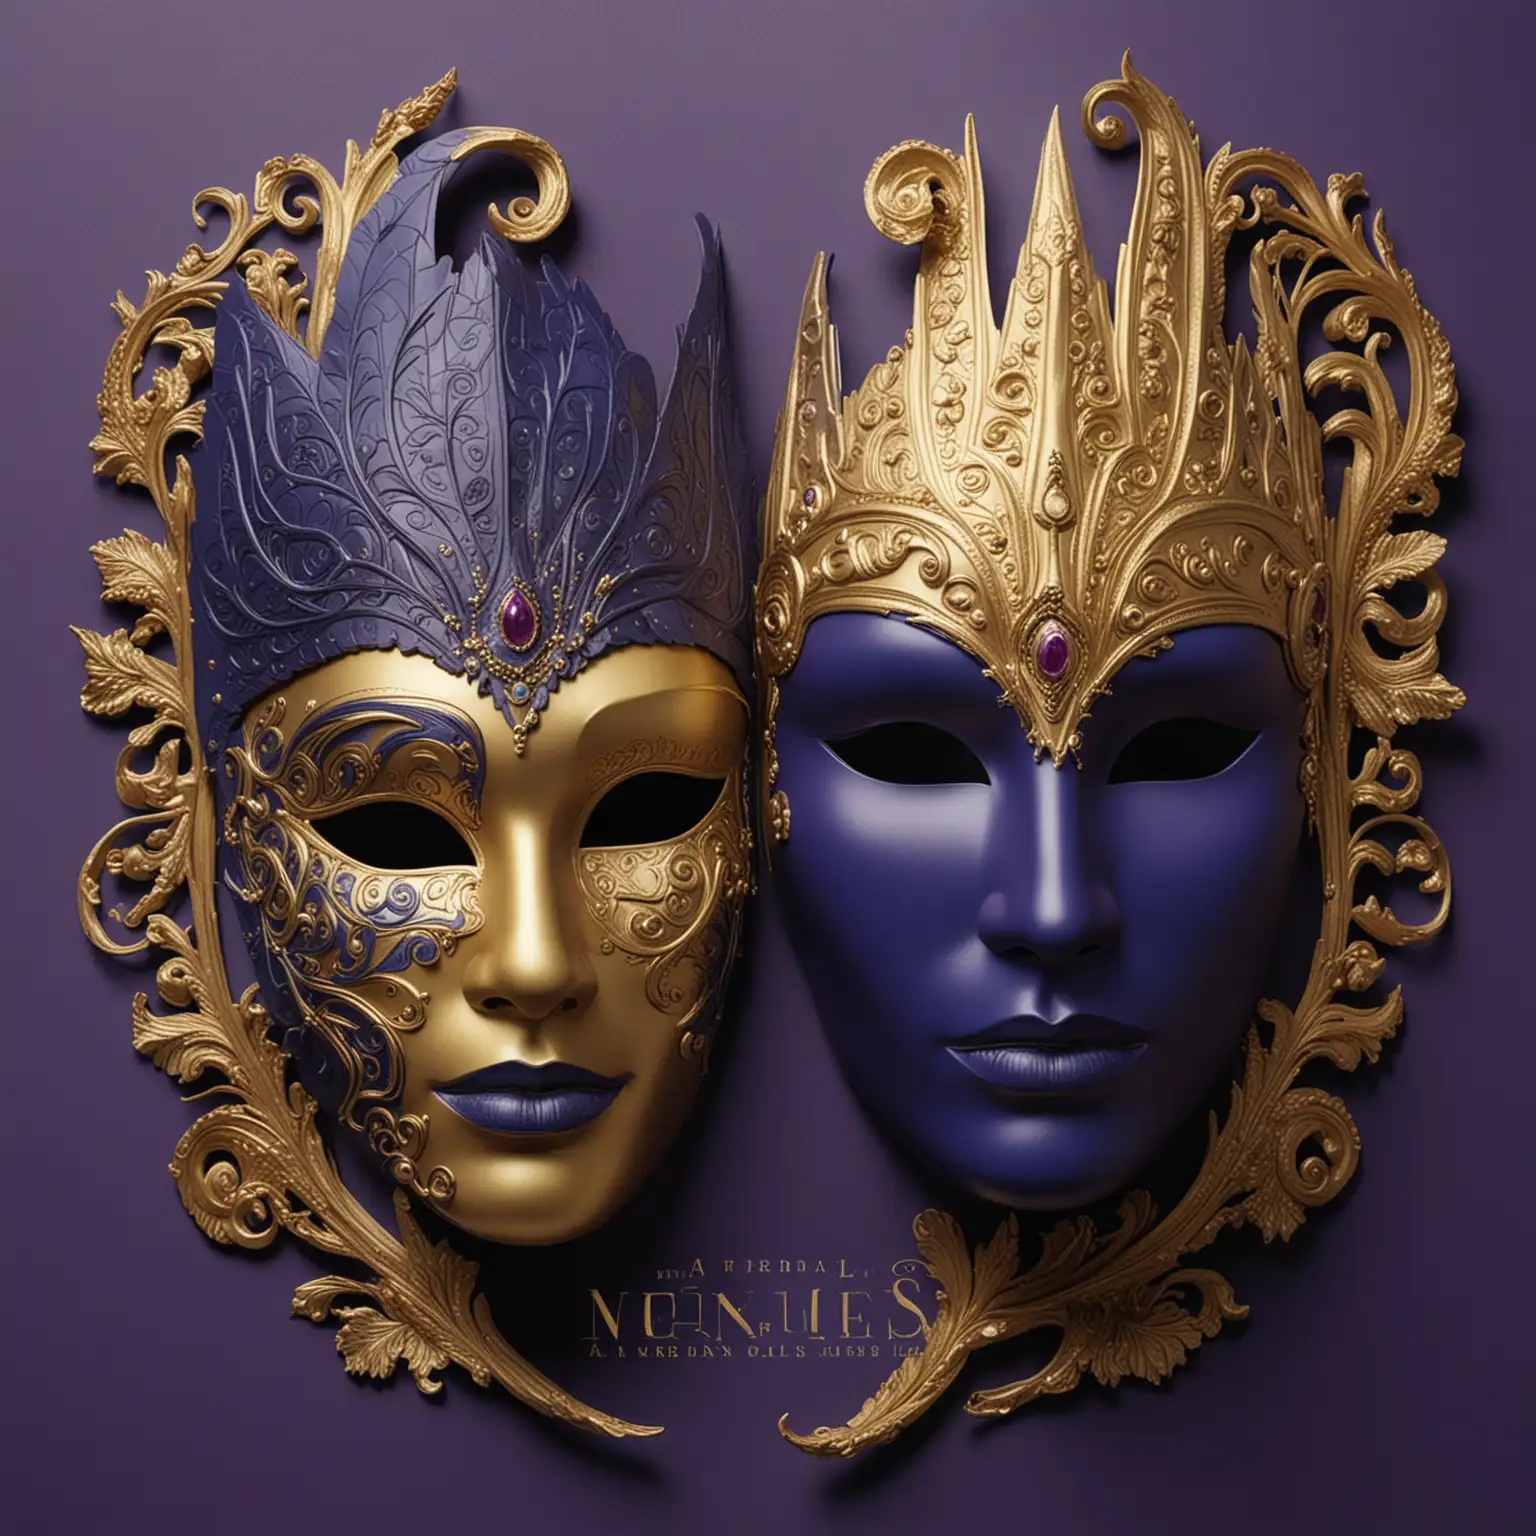 Unveiling the Masks of Men and Women" is displayed in bold, reflective lettering, drawing attention to the central theme of the book. The use of contrasting colors, such as deep blues and vibrant purples, adds visual interest and depth to the design, while subtle touches of gold evoke a sense of opulence and grandeur, echoing the narcissistic tendencies of the individuals depicted.

